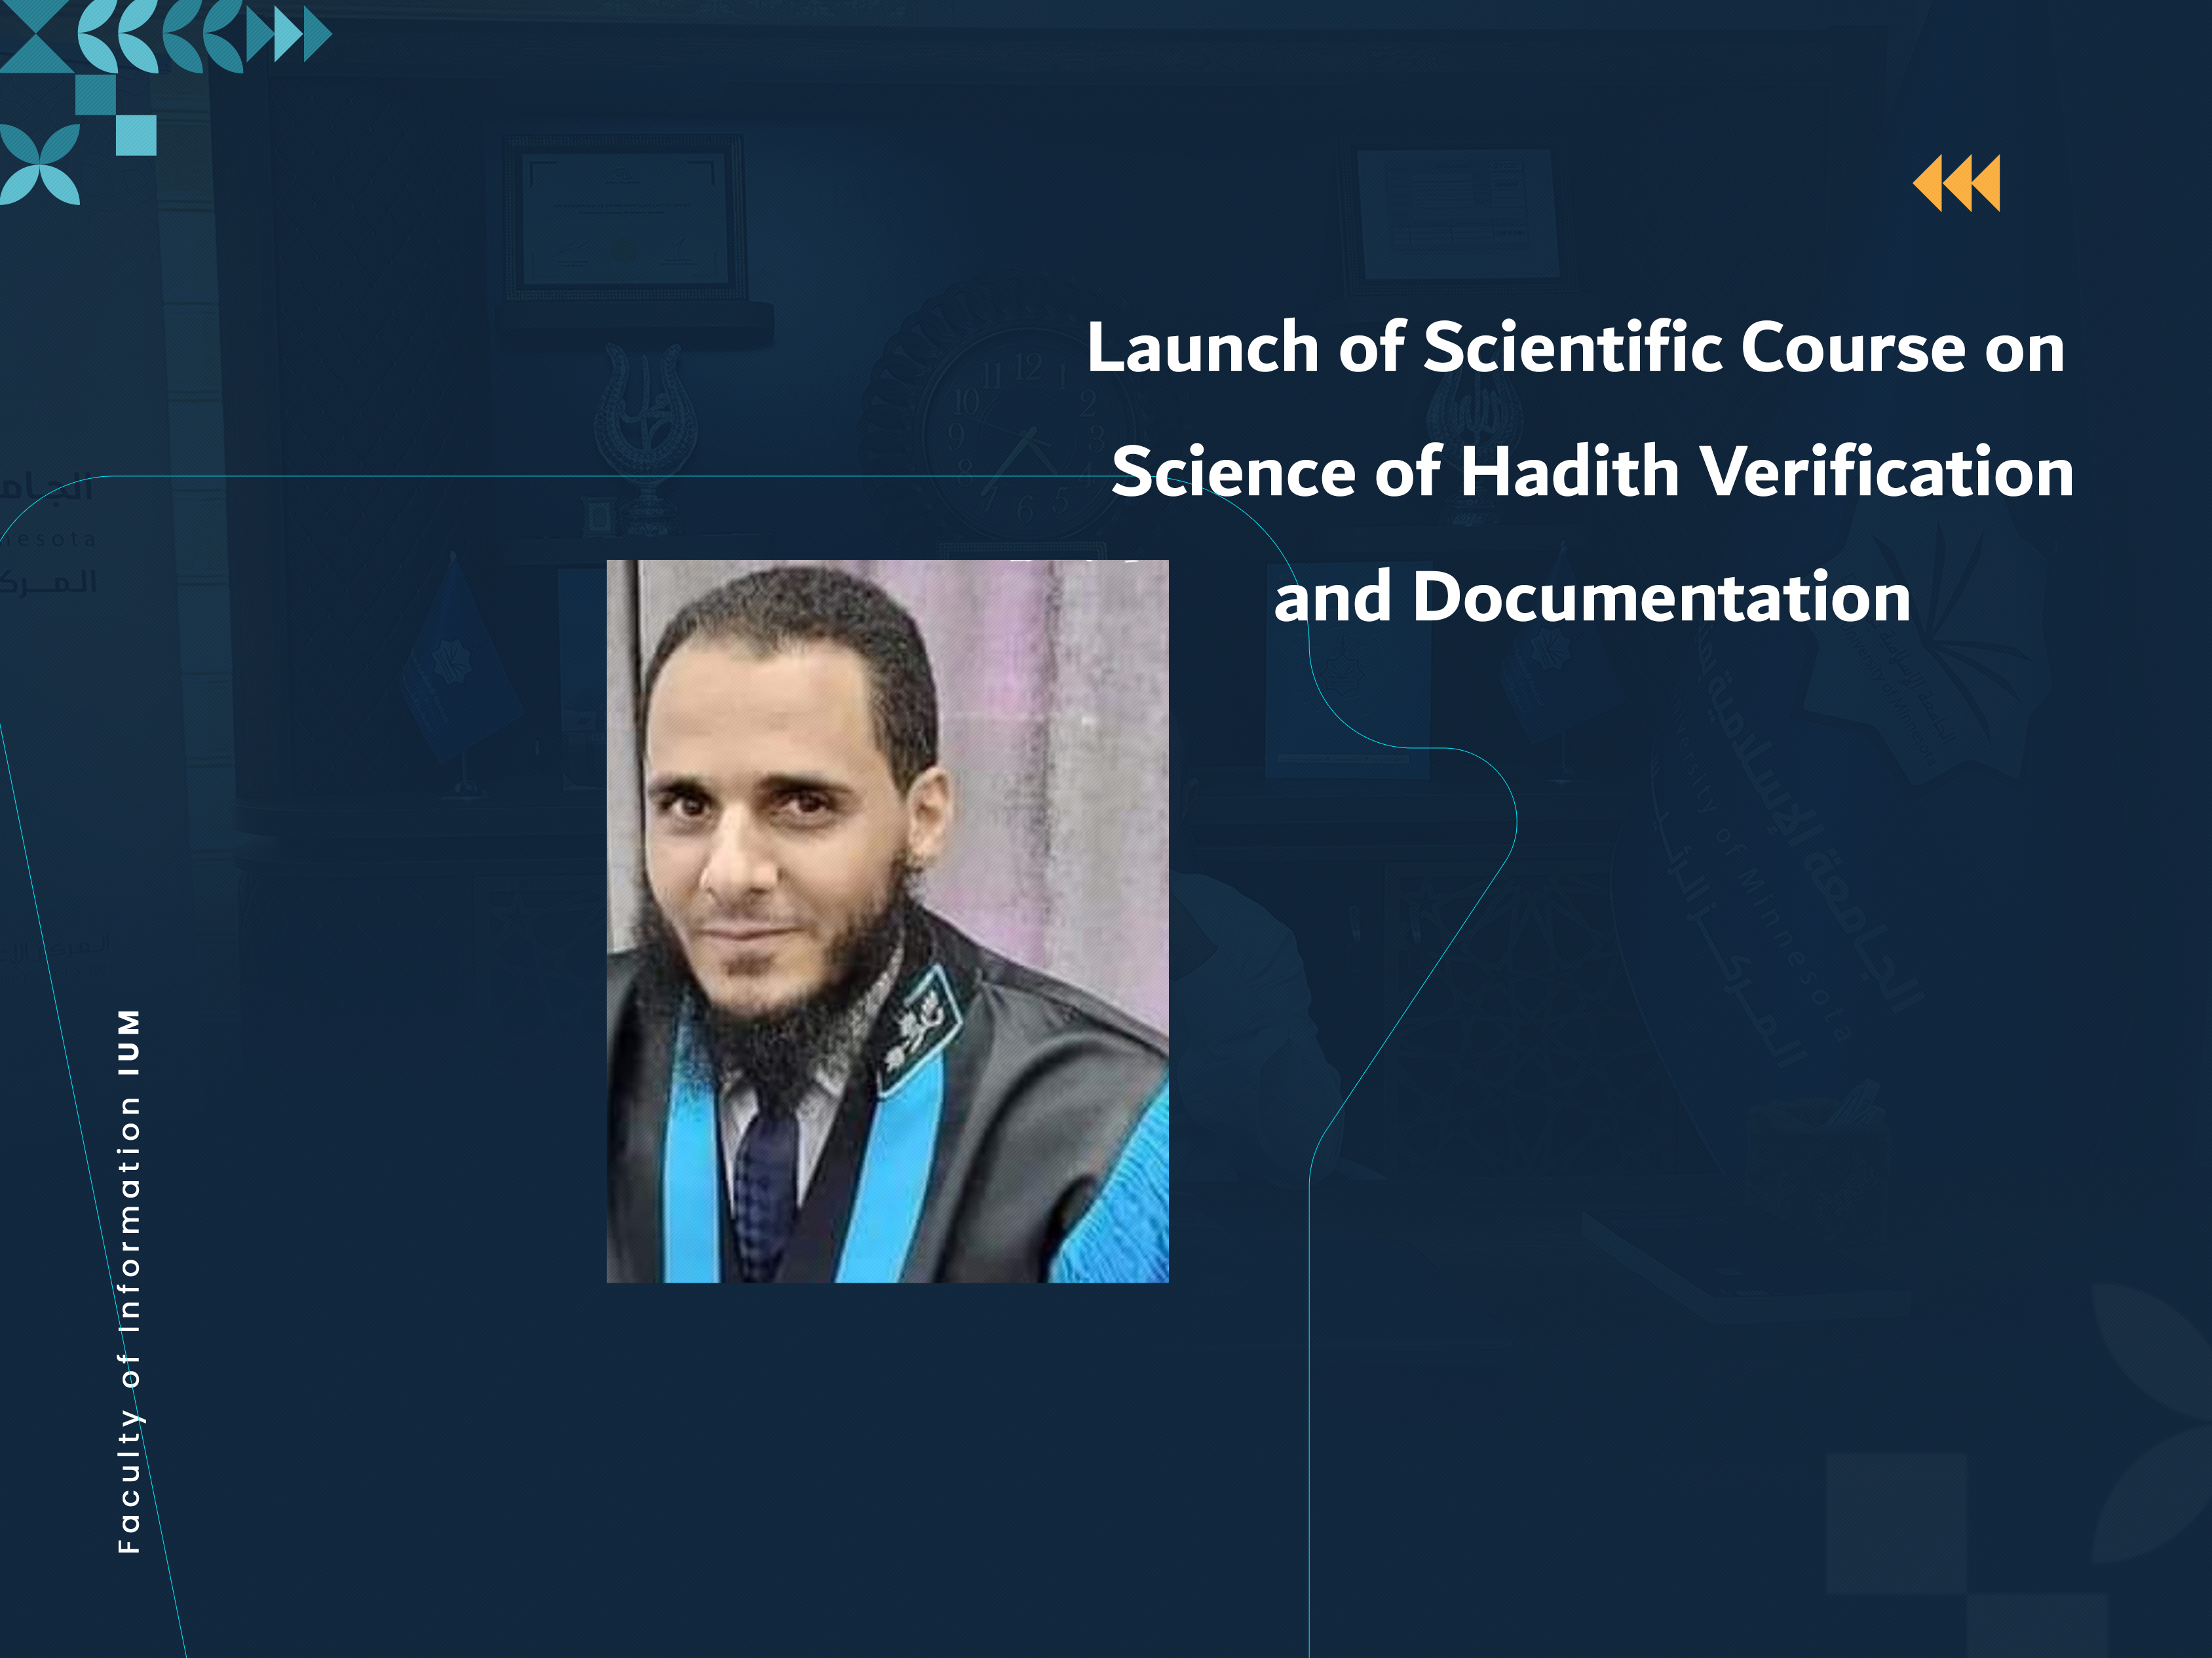 Launch of Scientific Course on Science of Hadith Verification and Documentation